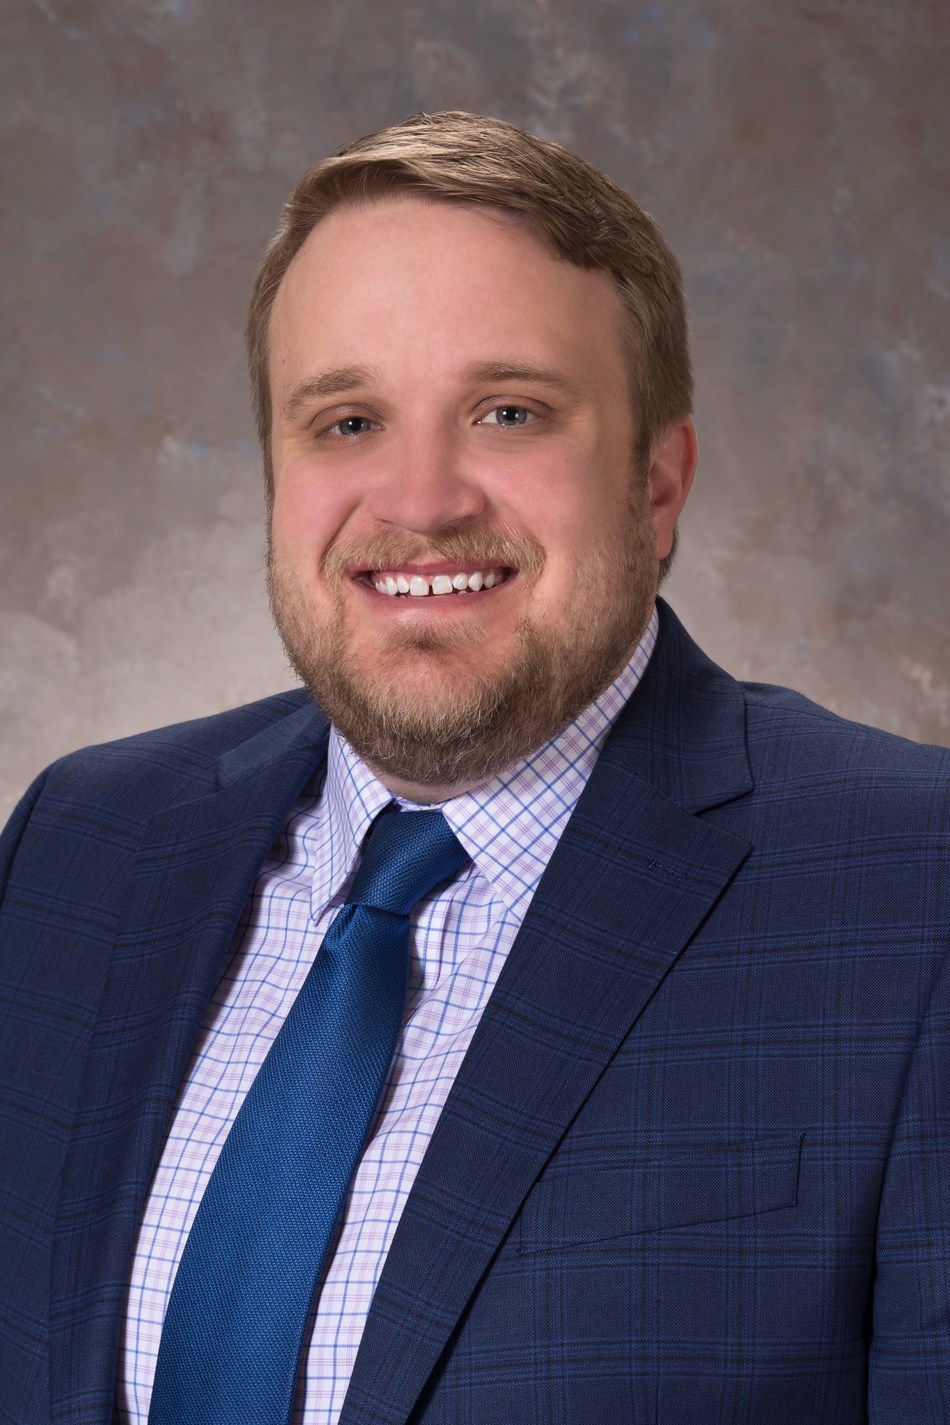 Watercrest Senior Living Group proudly welcomes Blake Patterson as Executive Director of Watercrest Columbia Assisted Living and Memory Care in Columbia, SC.